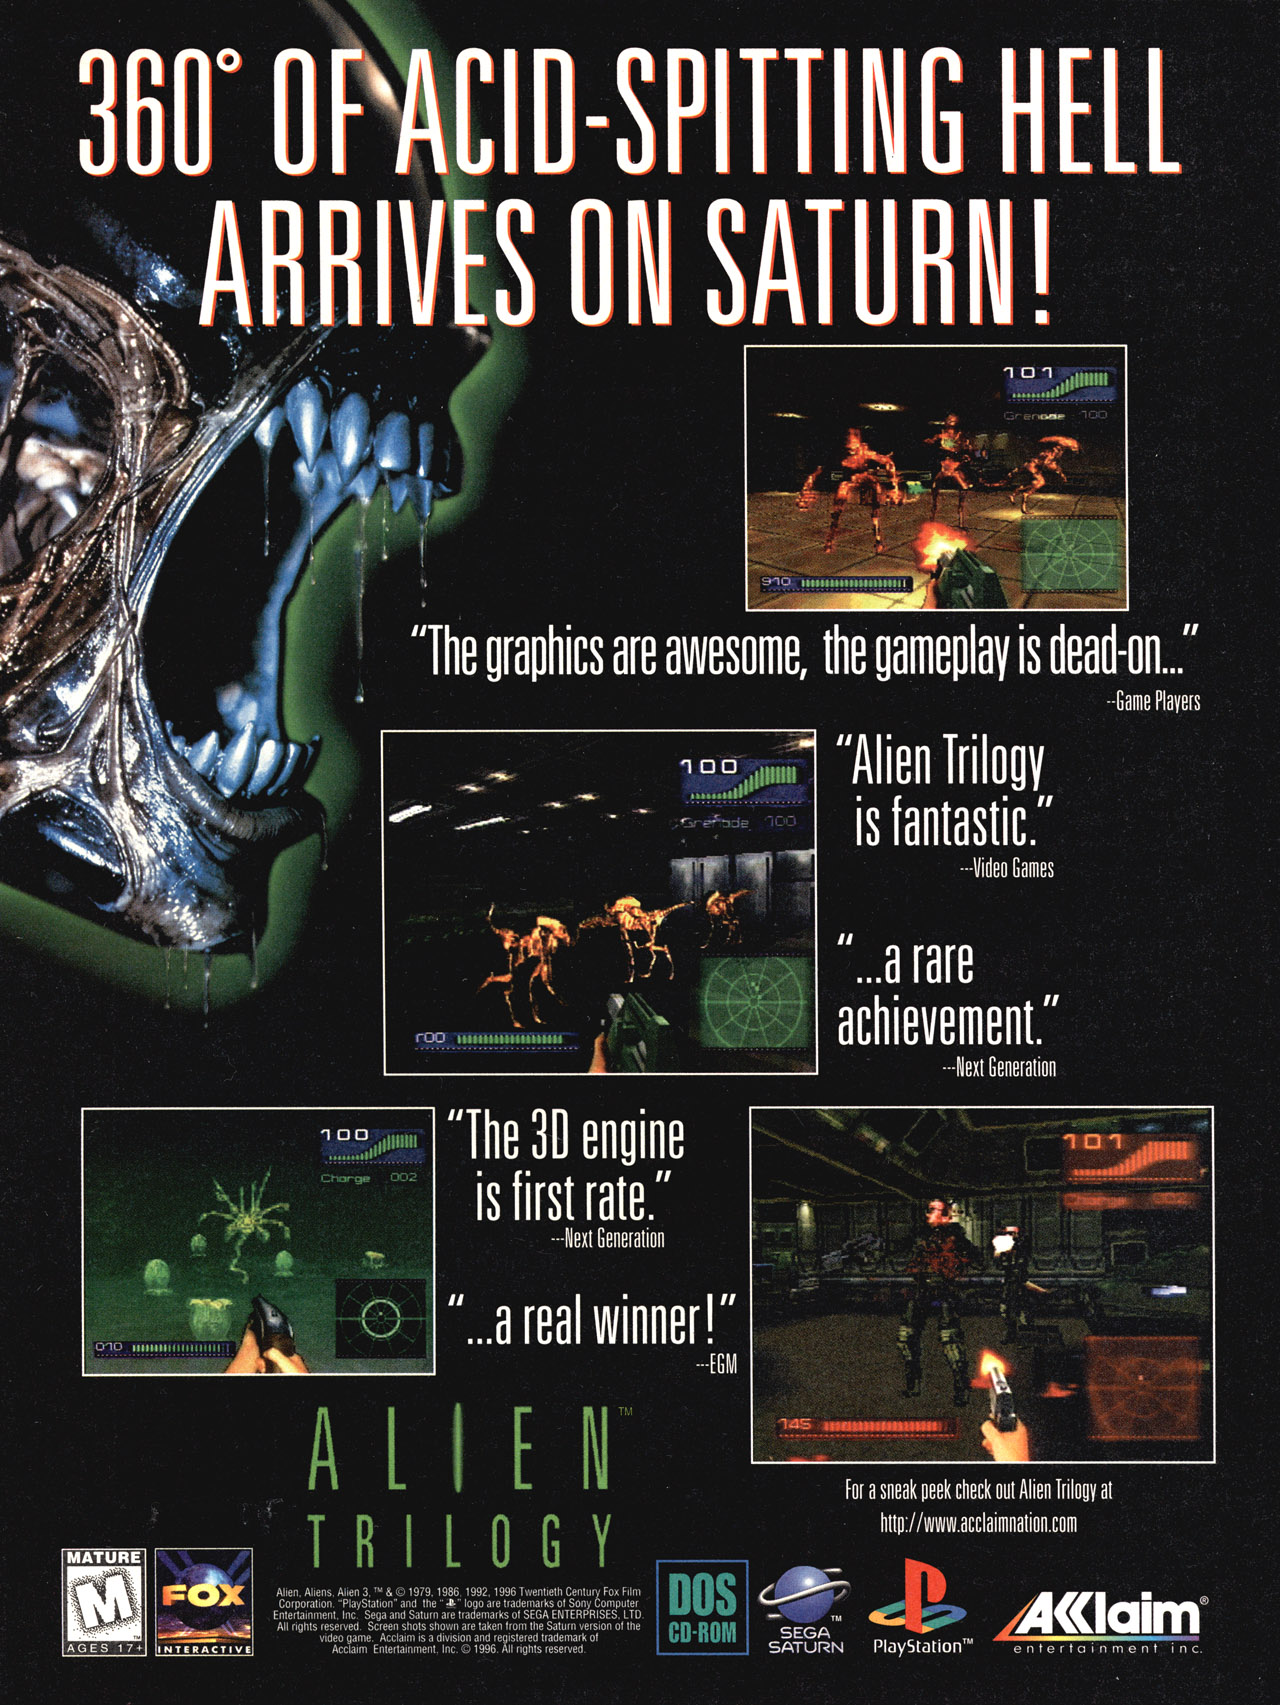 The bitch is back! Alien Trilogy was an early 3D era first person shooter developed by Probe Software for Acclaim. The notion of it being based on a trilogy is […]